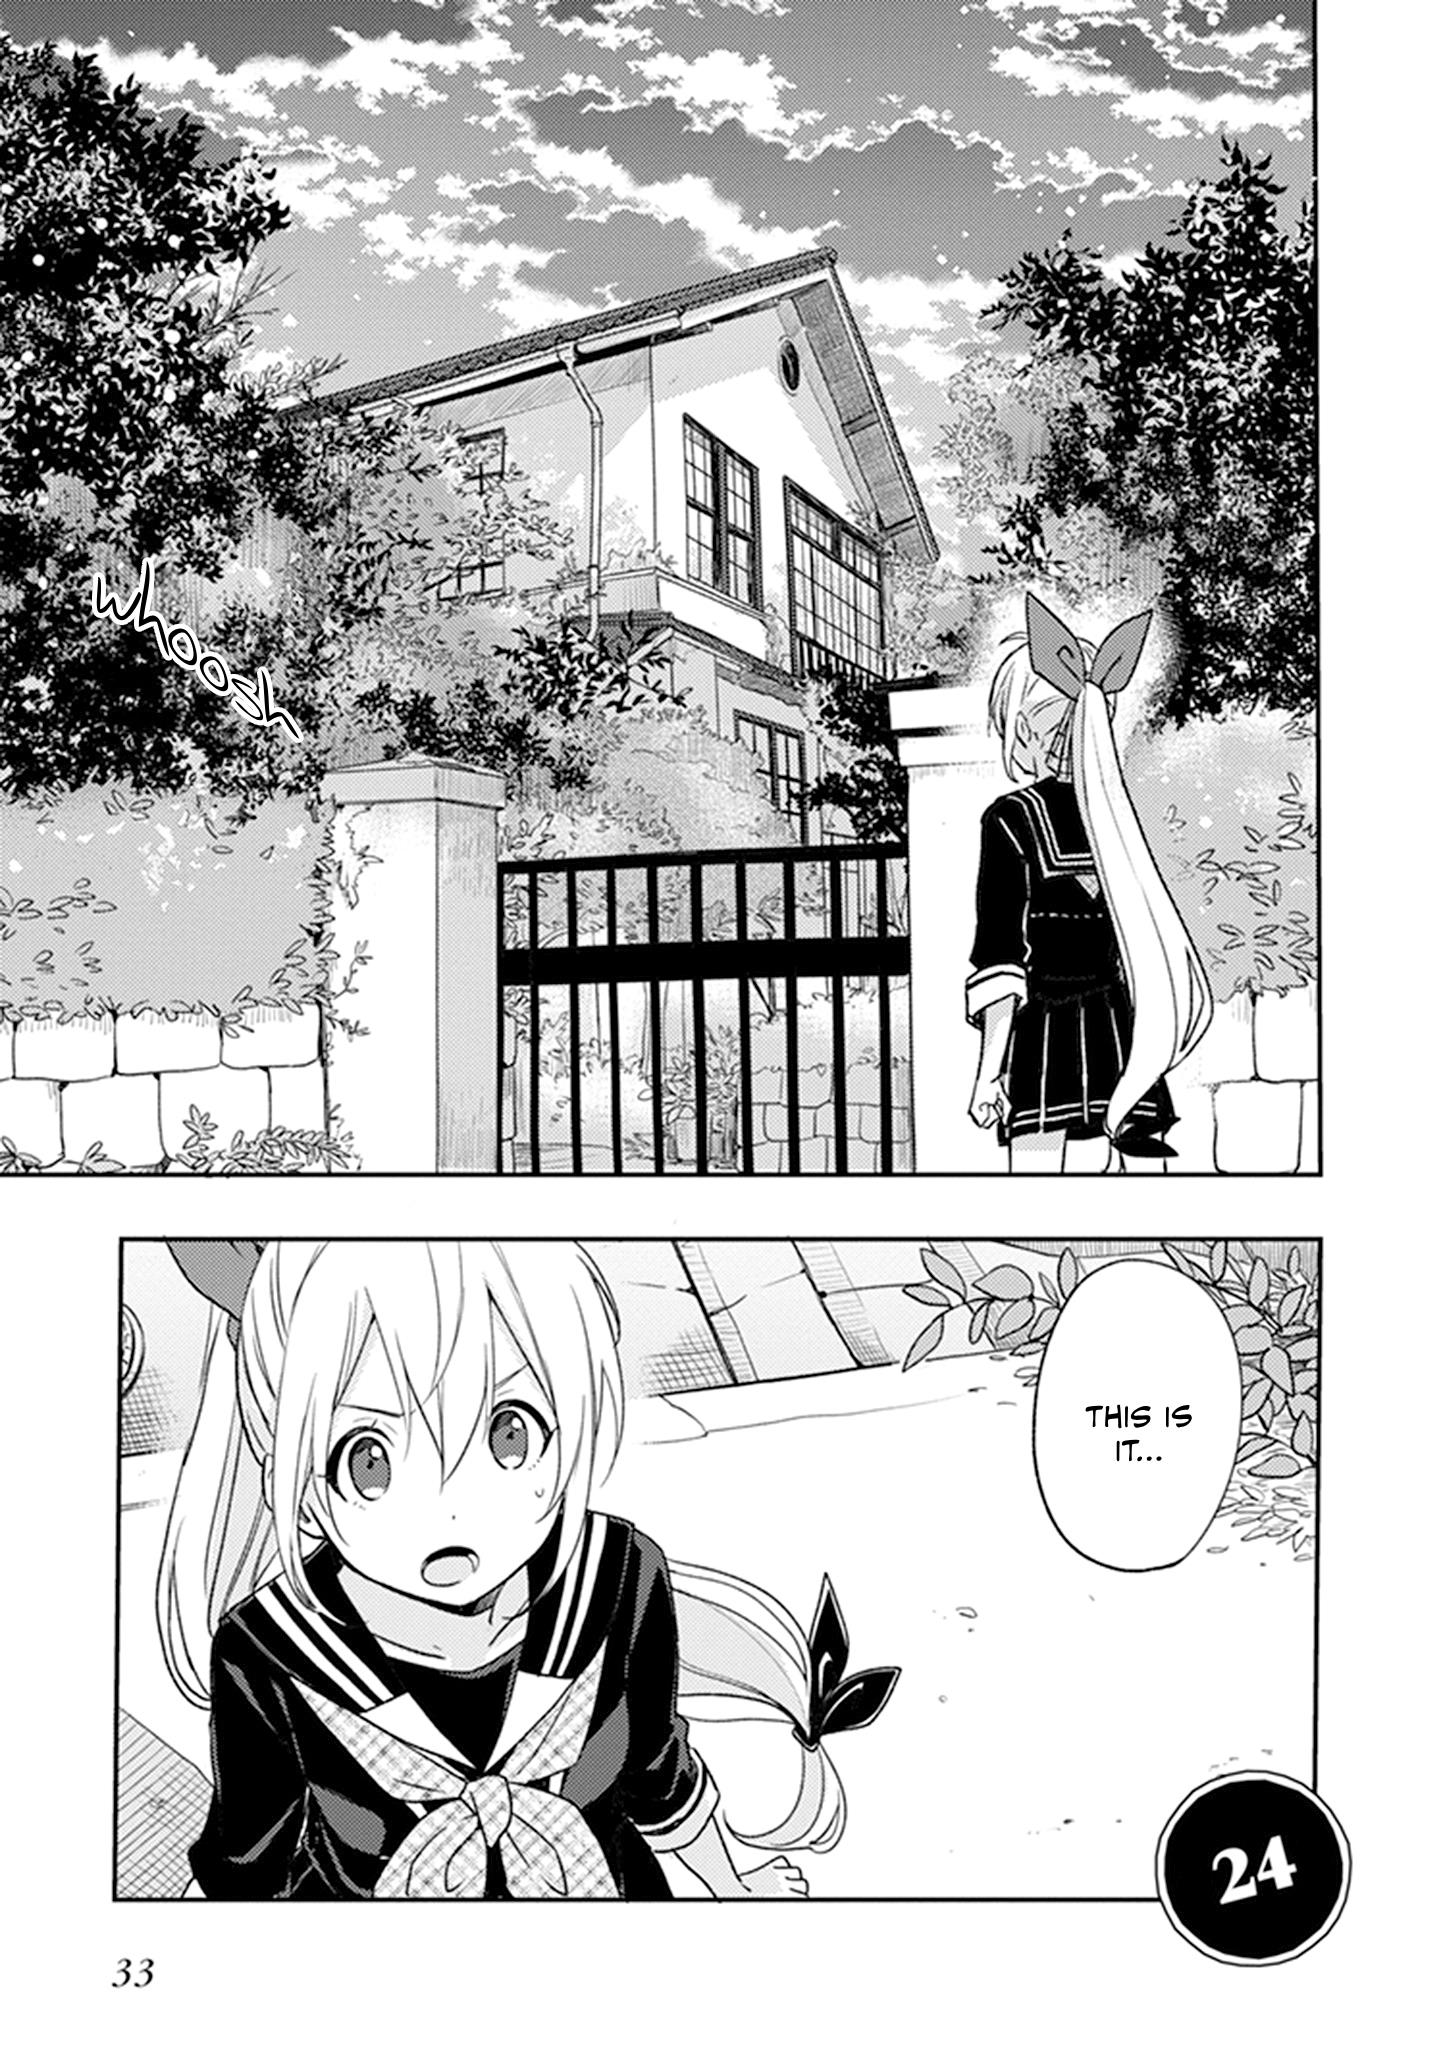 Gendai Majo No Shuushoku Jijou Vol.5 Chapter 24: The Significance Of The Witch’S Existence - Picture 2